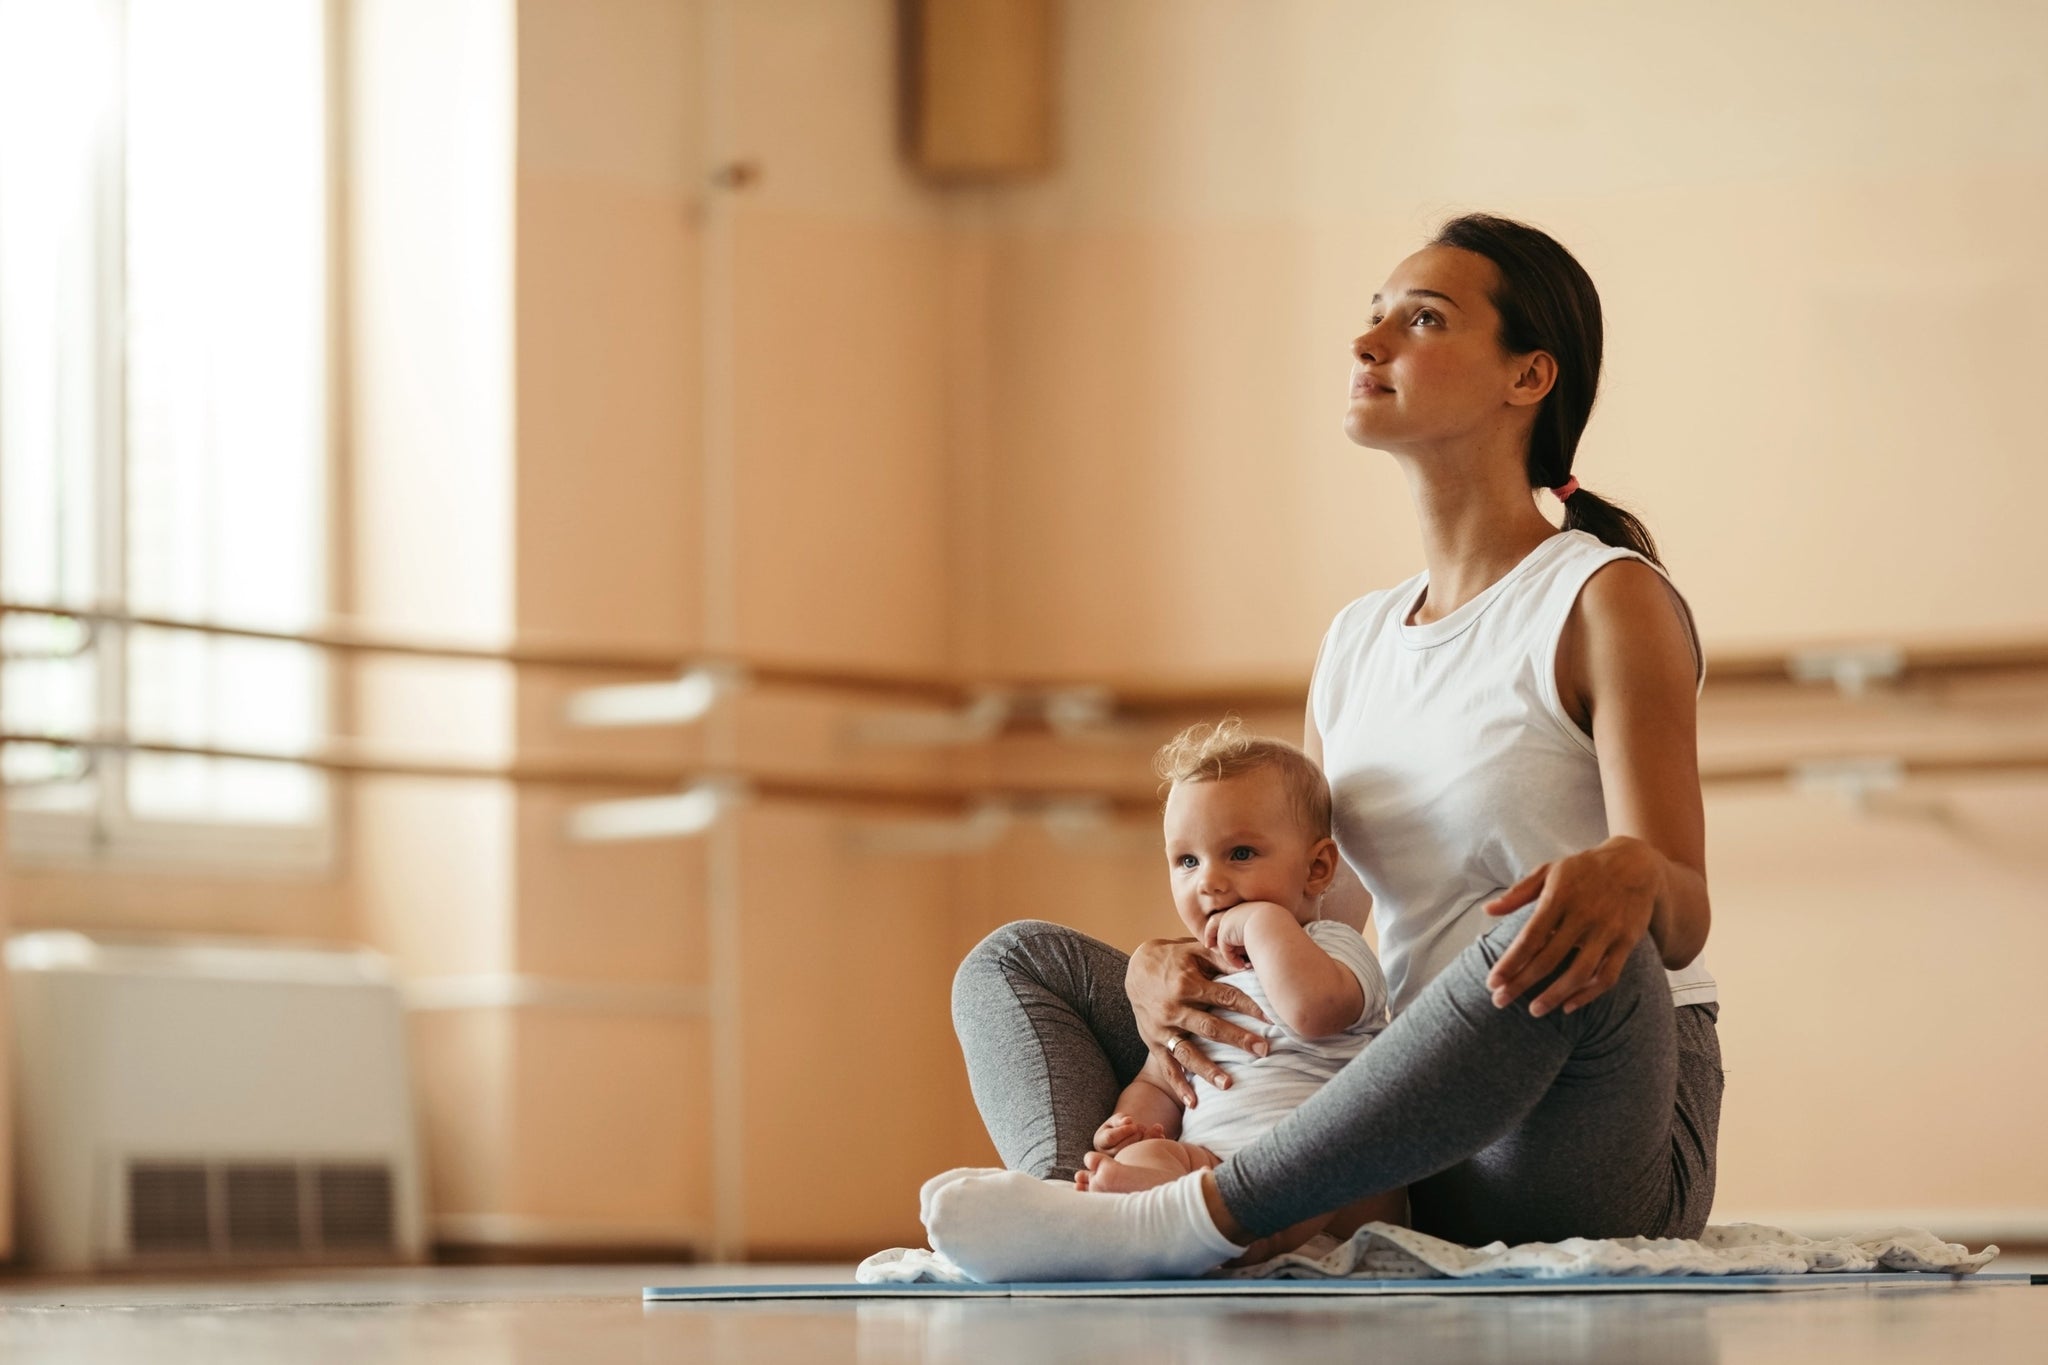 10 Things You Can Do to Take Care of Yourself As A New Mom